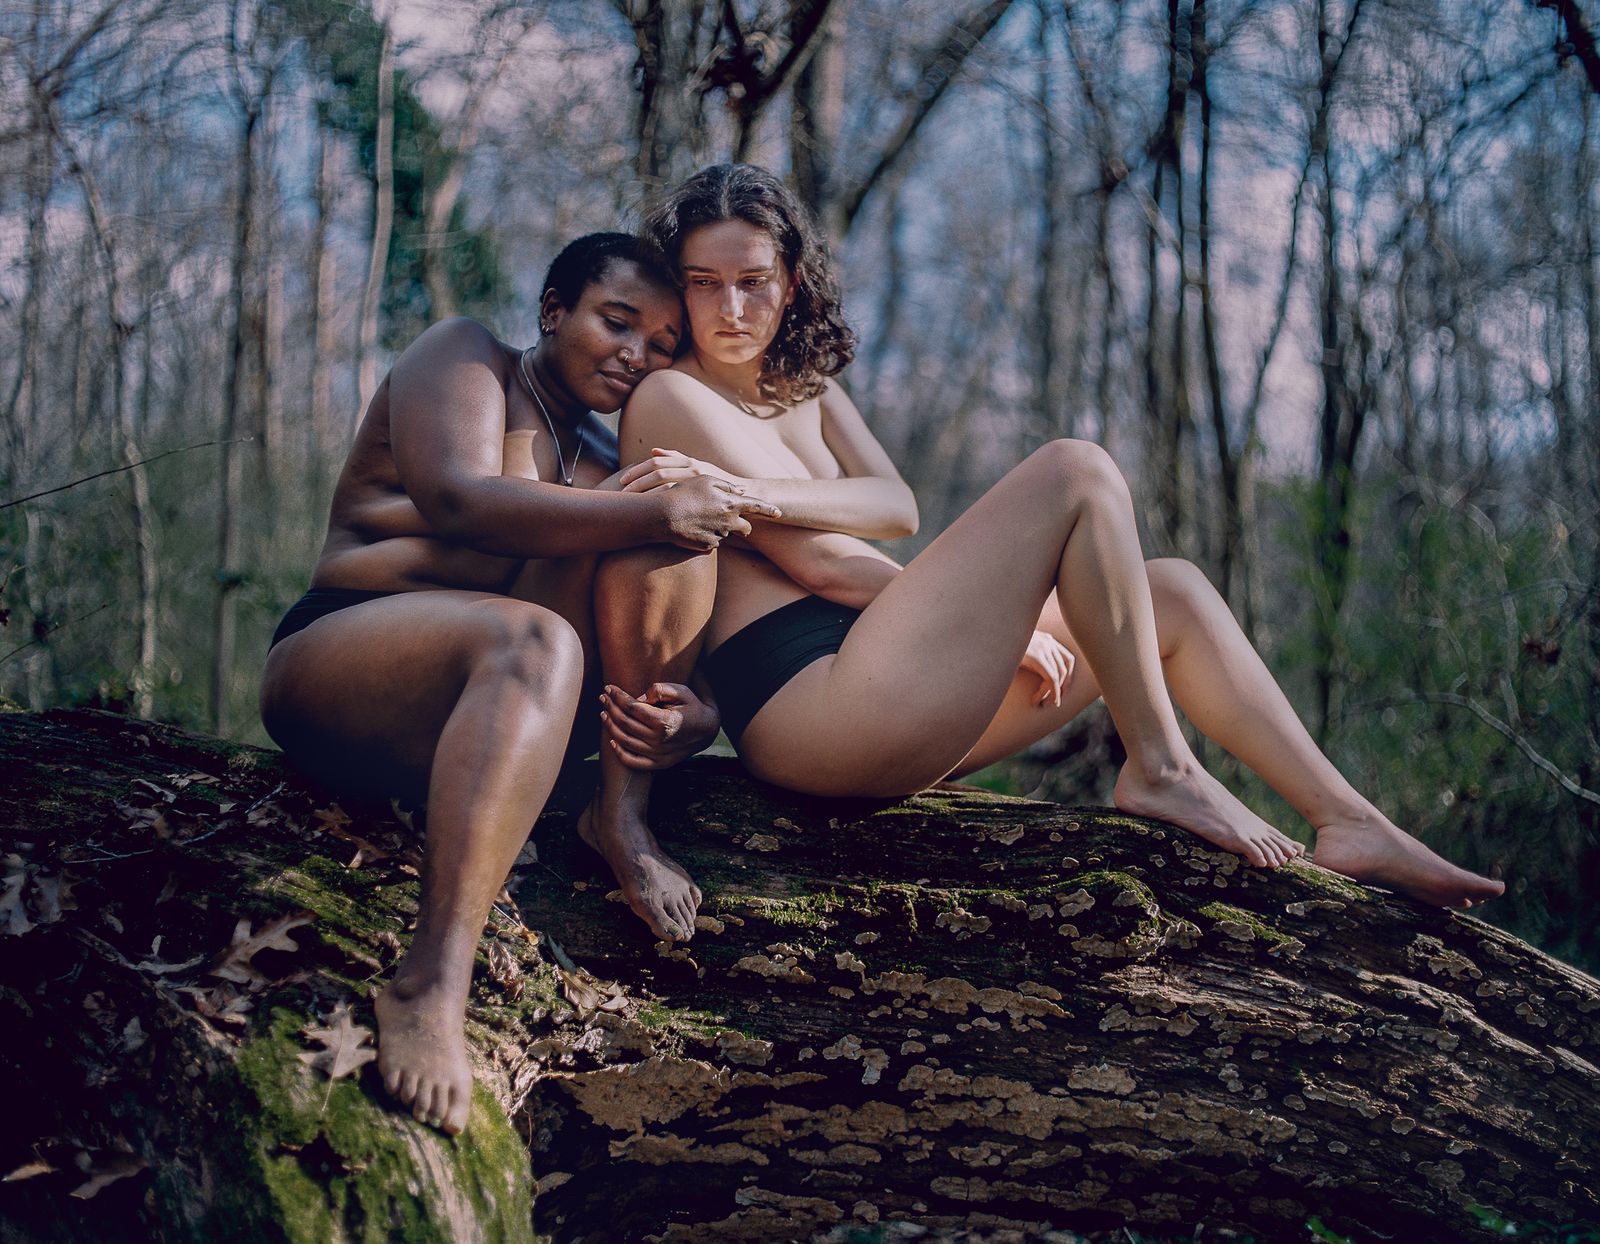 © cree moore - Image from the Containing Intimacy photography project